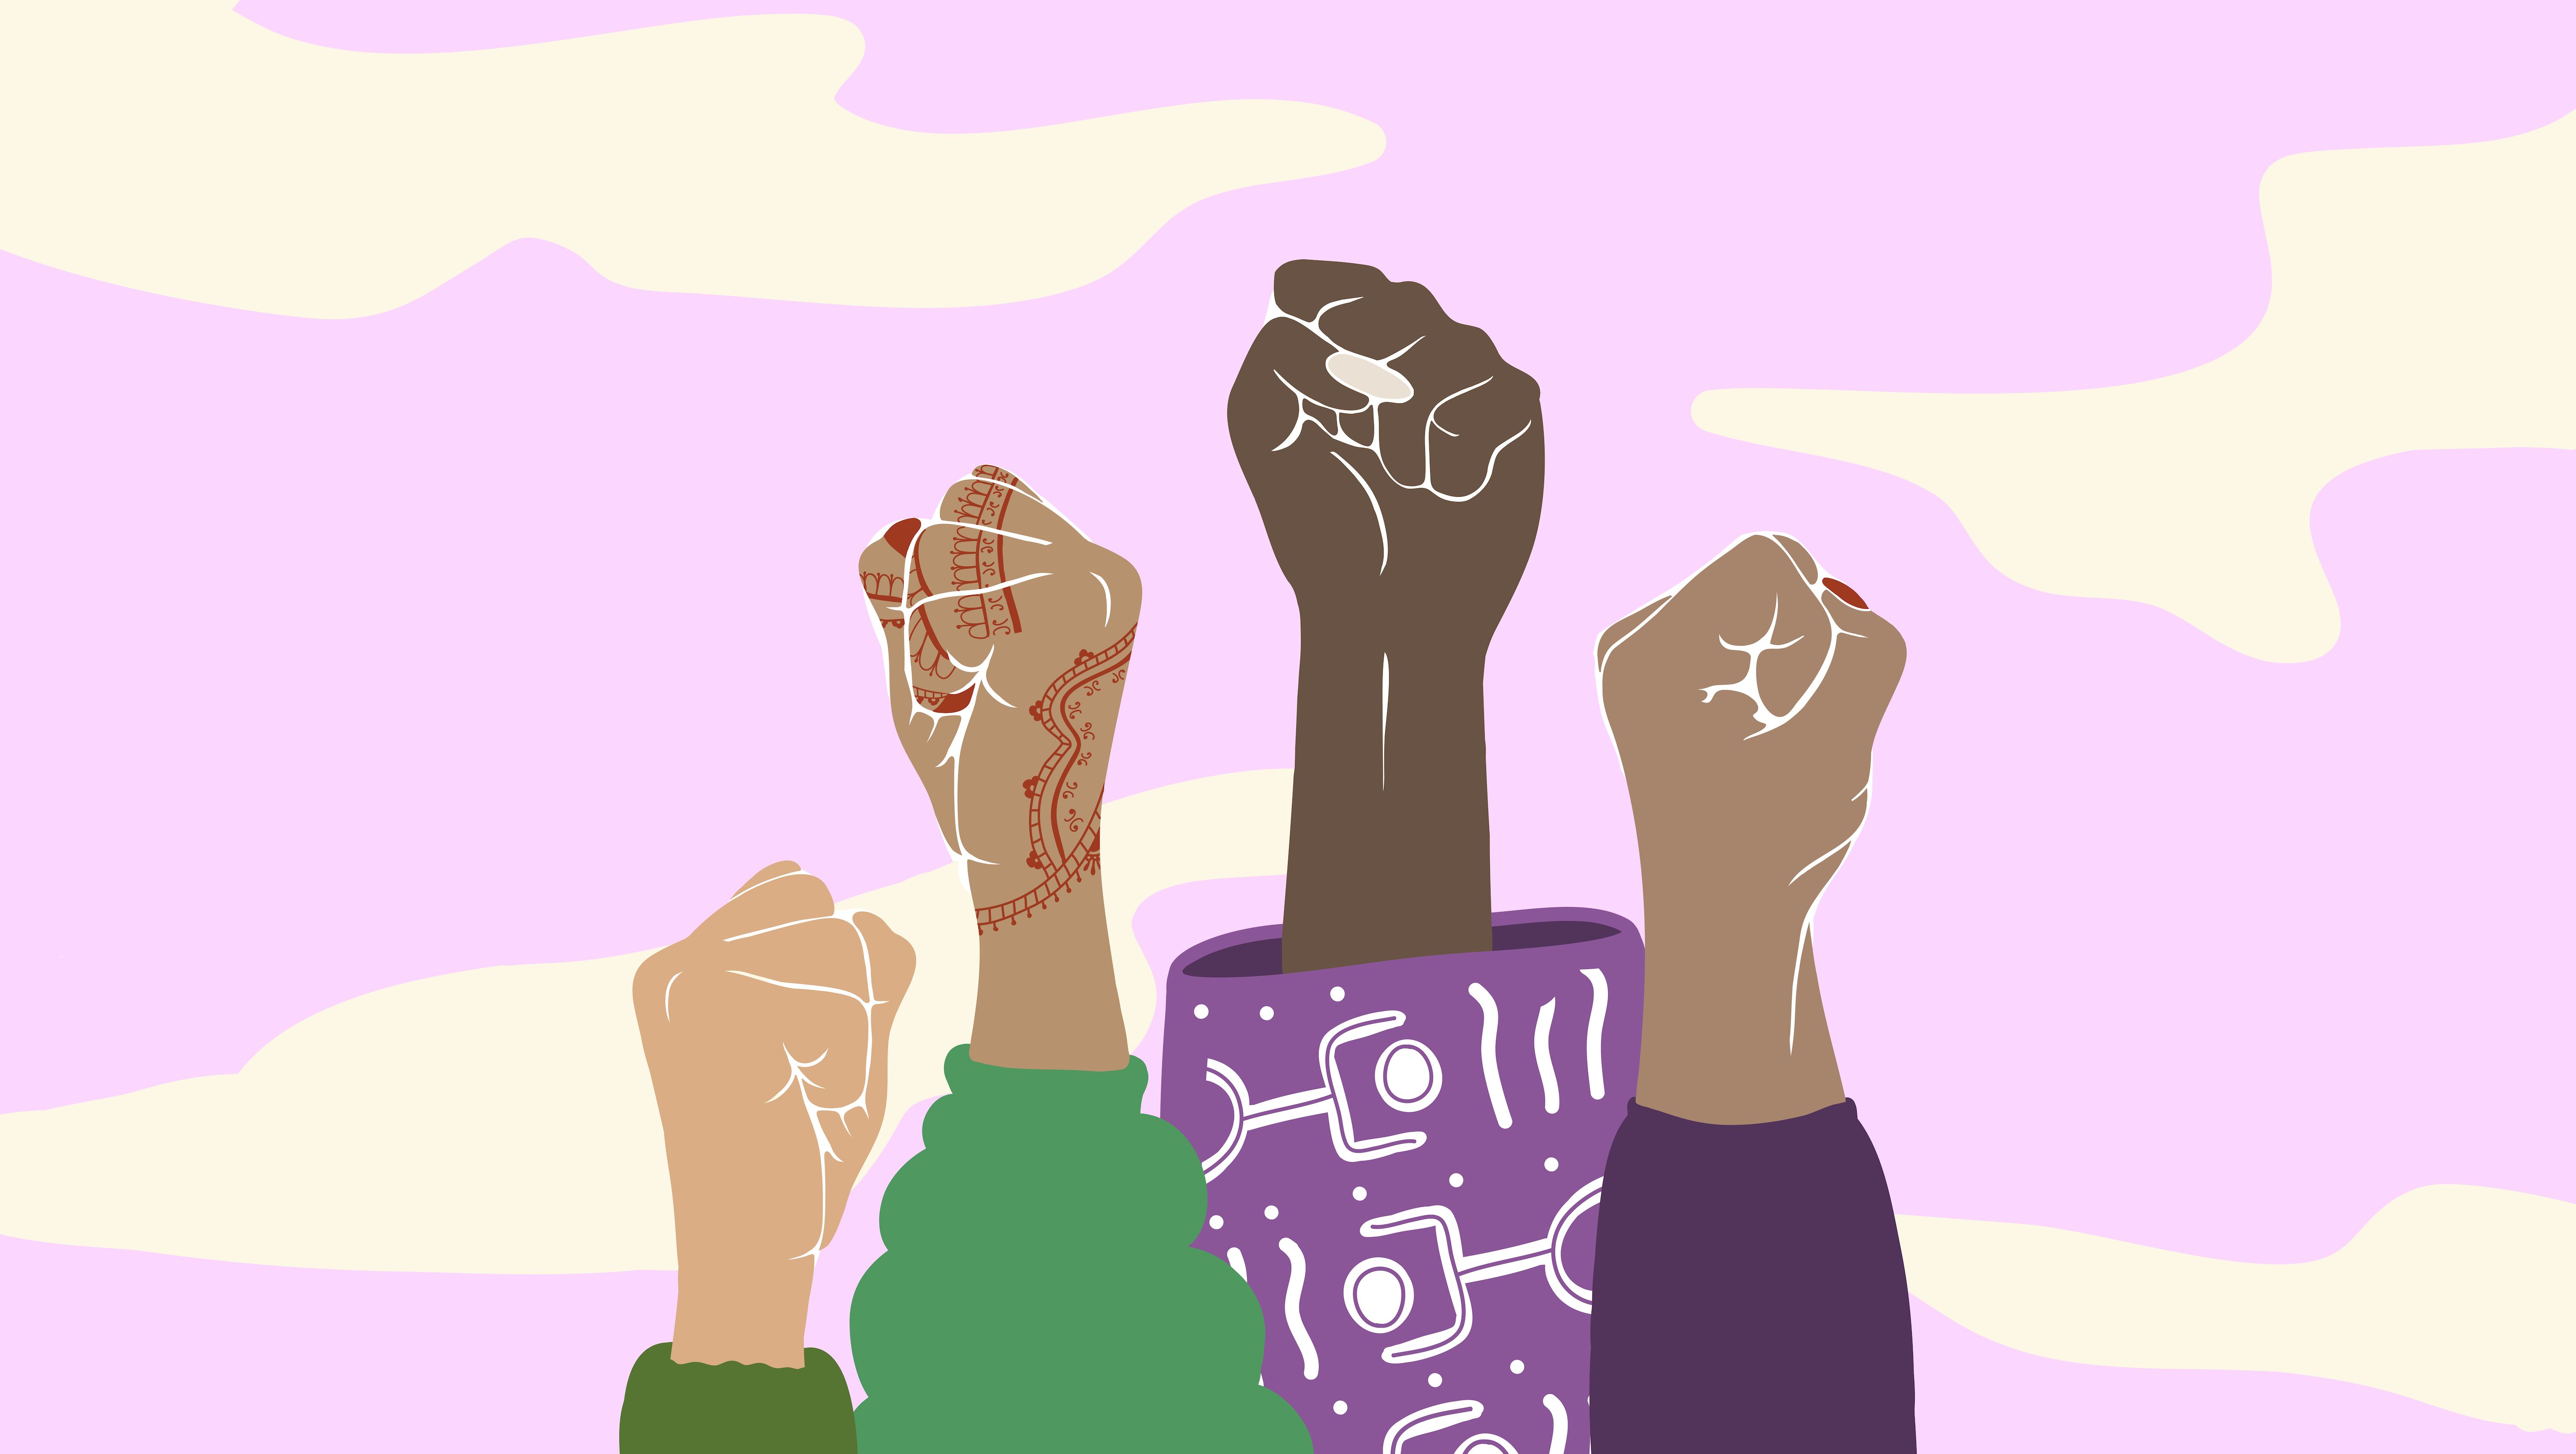 An illustration of four hands in fists pointing to the sky against a purple background. They are different ethnicities and one has henna on the hand.